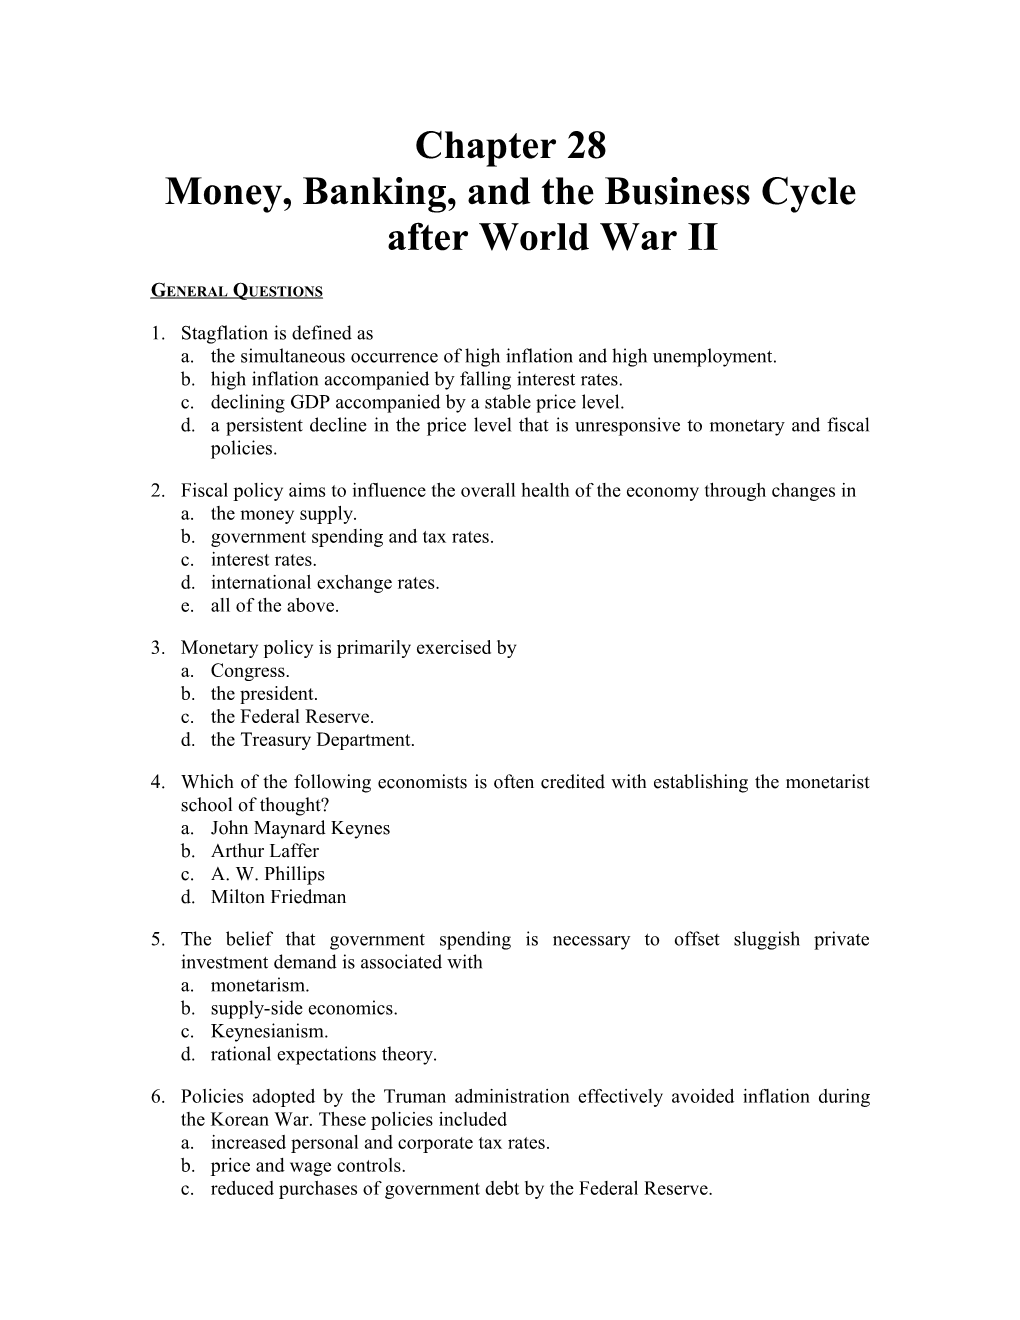 Money, Banking, and the Business Cycle After World War II